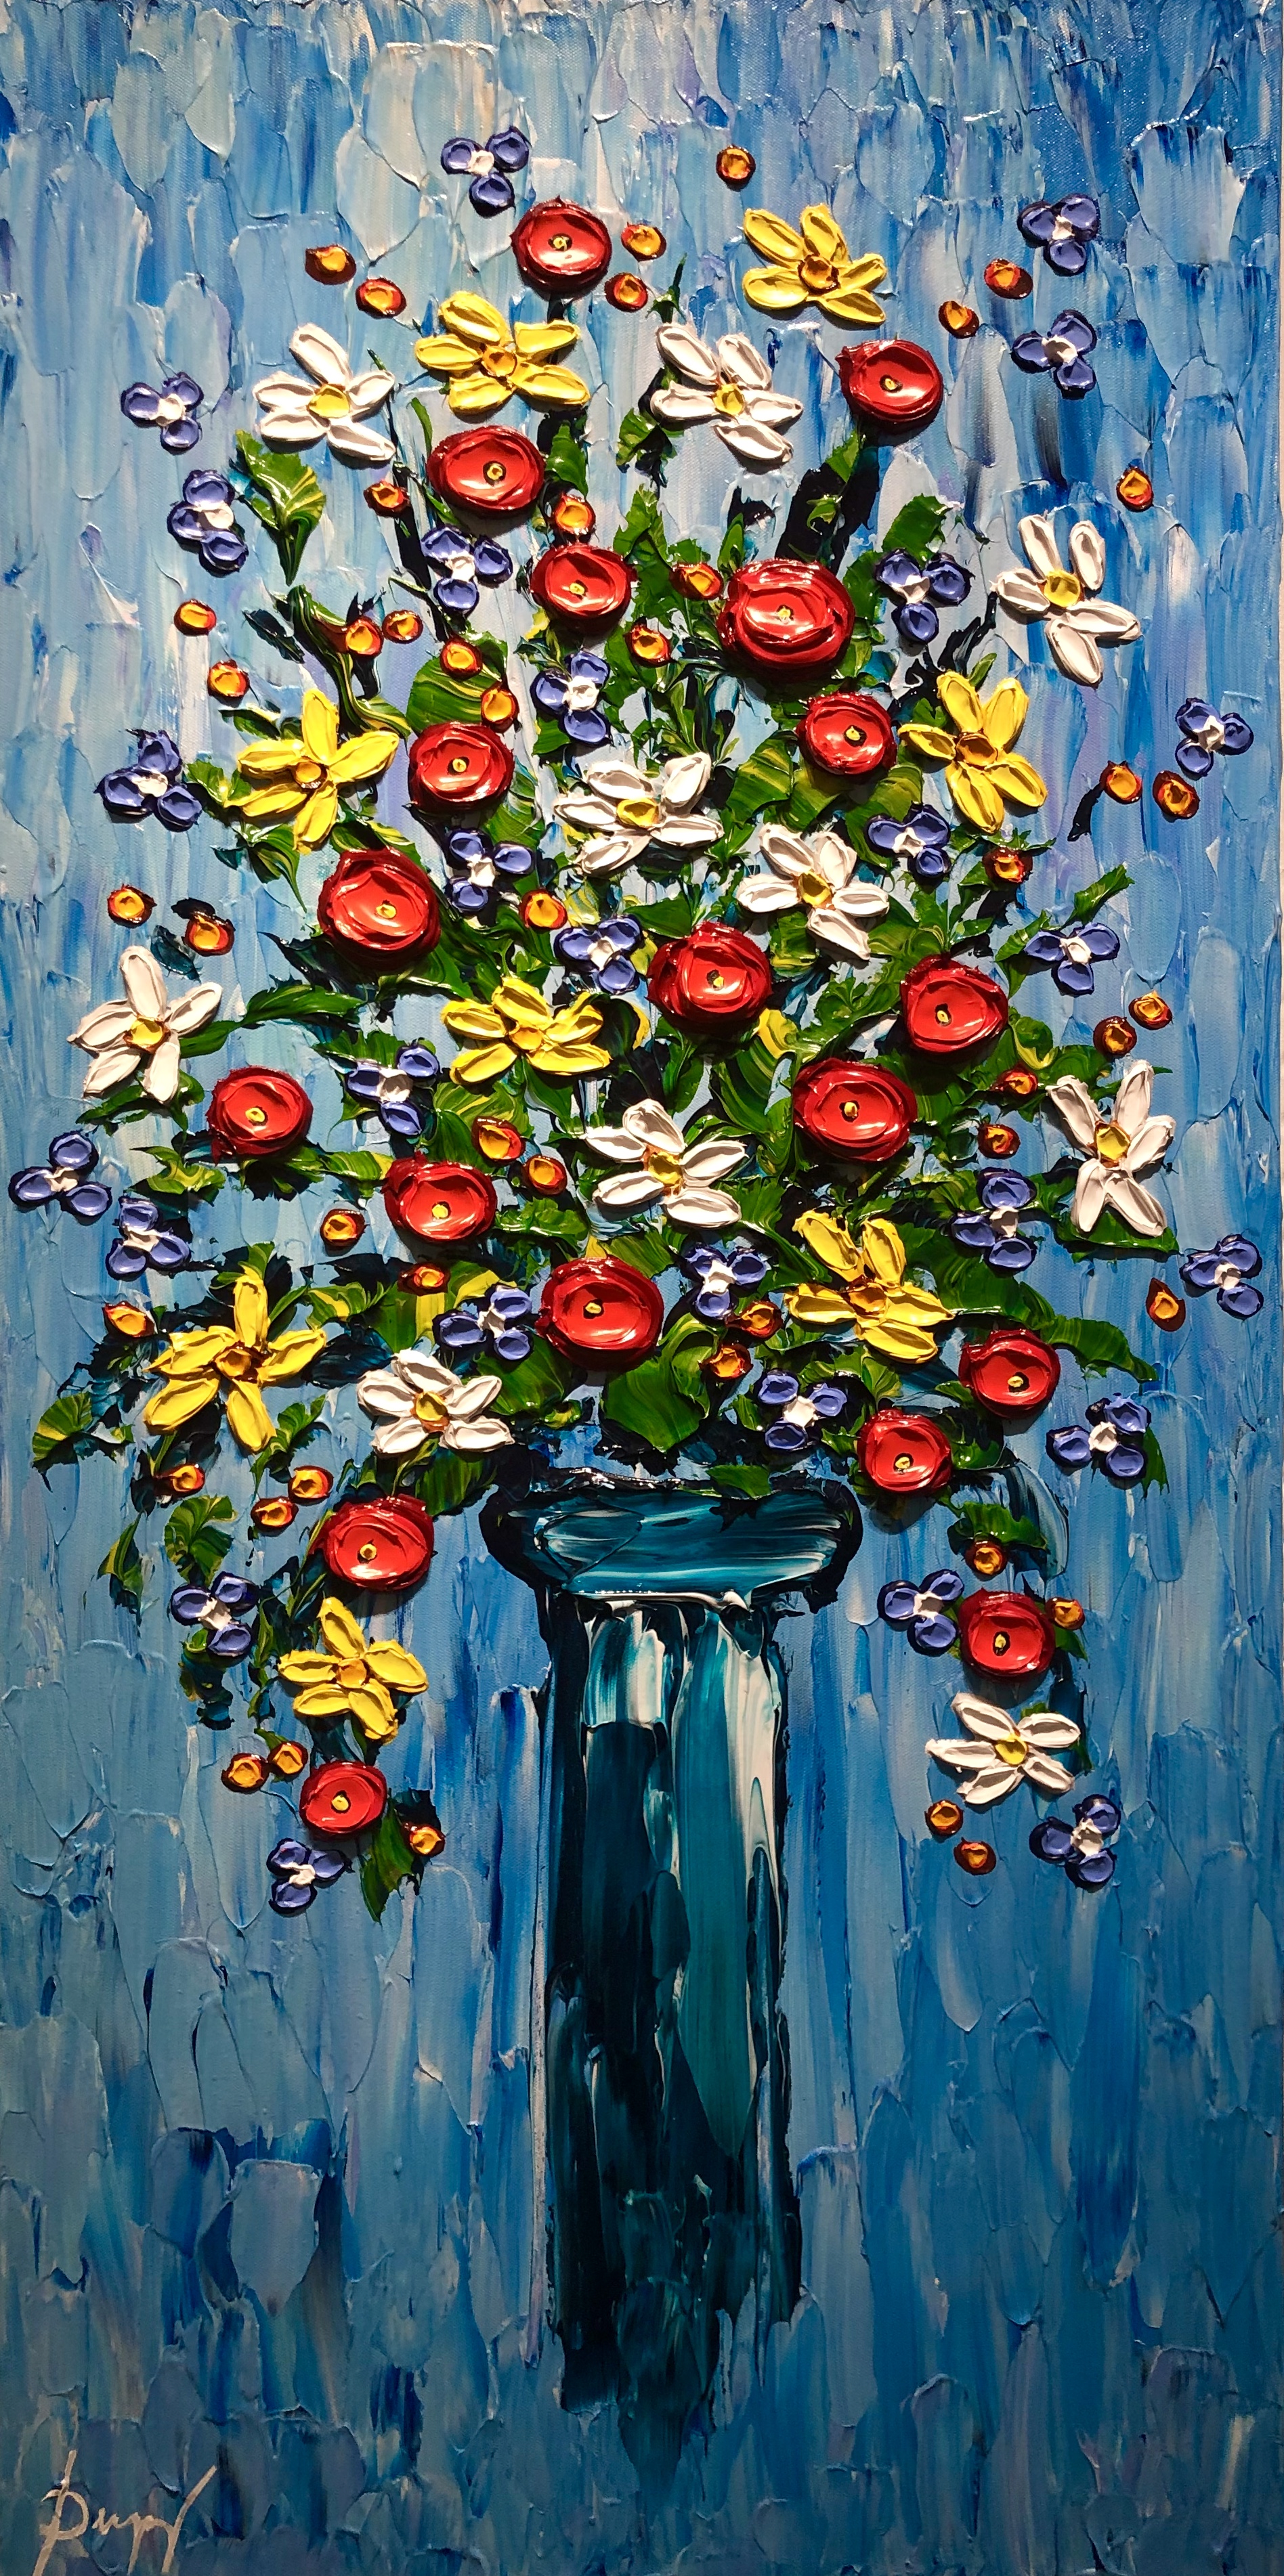 Dupuy "Vase of Colorful Poppies" 40x20